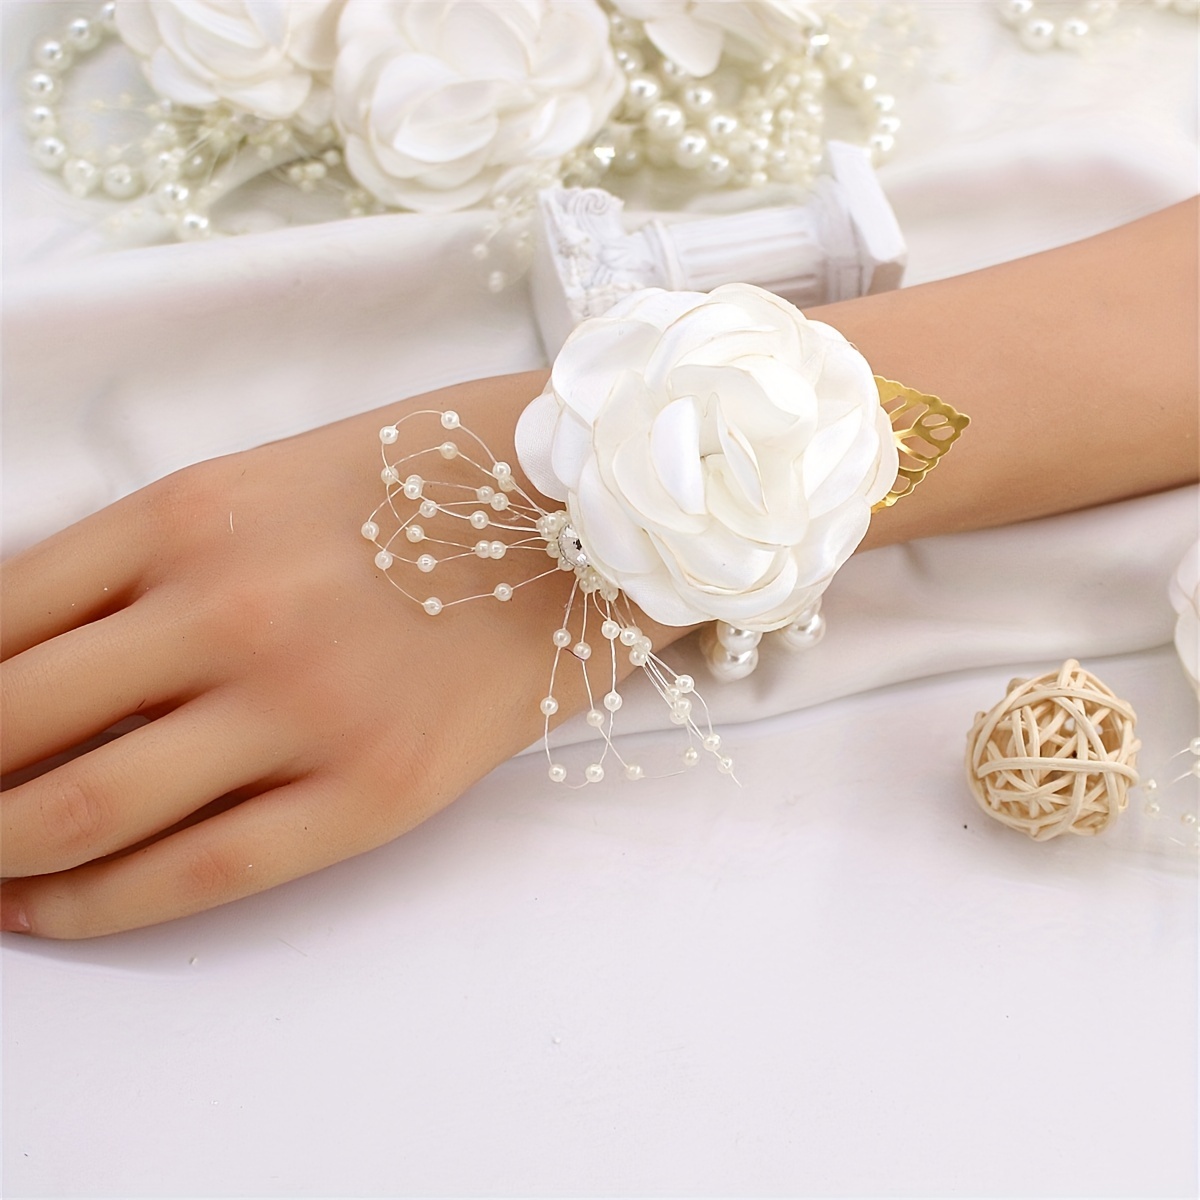 Guqqeuc Rose Wrist Corsage with Stretch Pearl Bracelet for Bridesmaid  Flower Wrist Wristband for Girls Wedding Corsage Hand Flower for Wedding  Prom